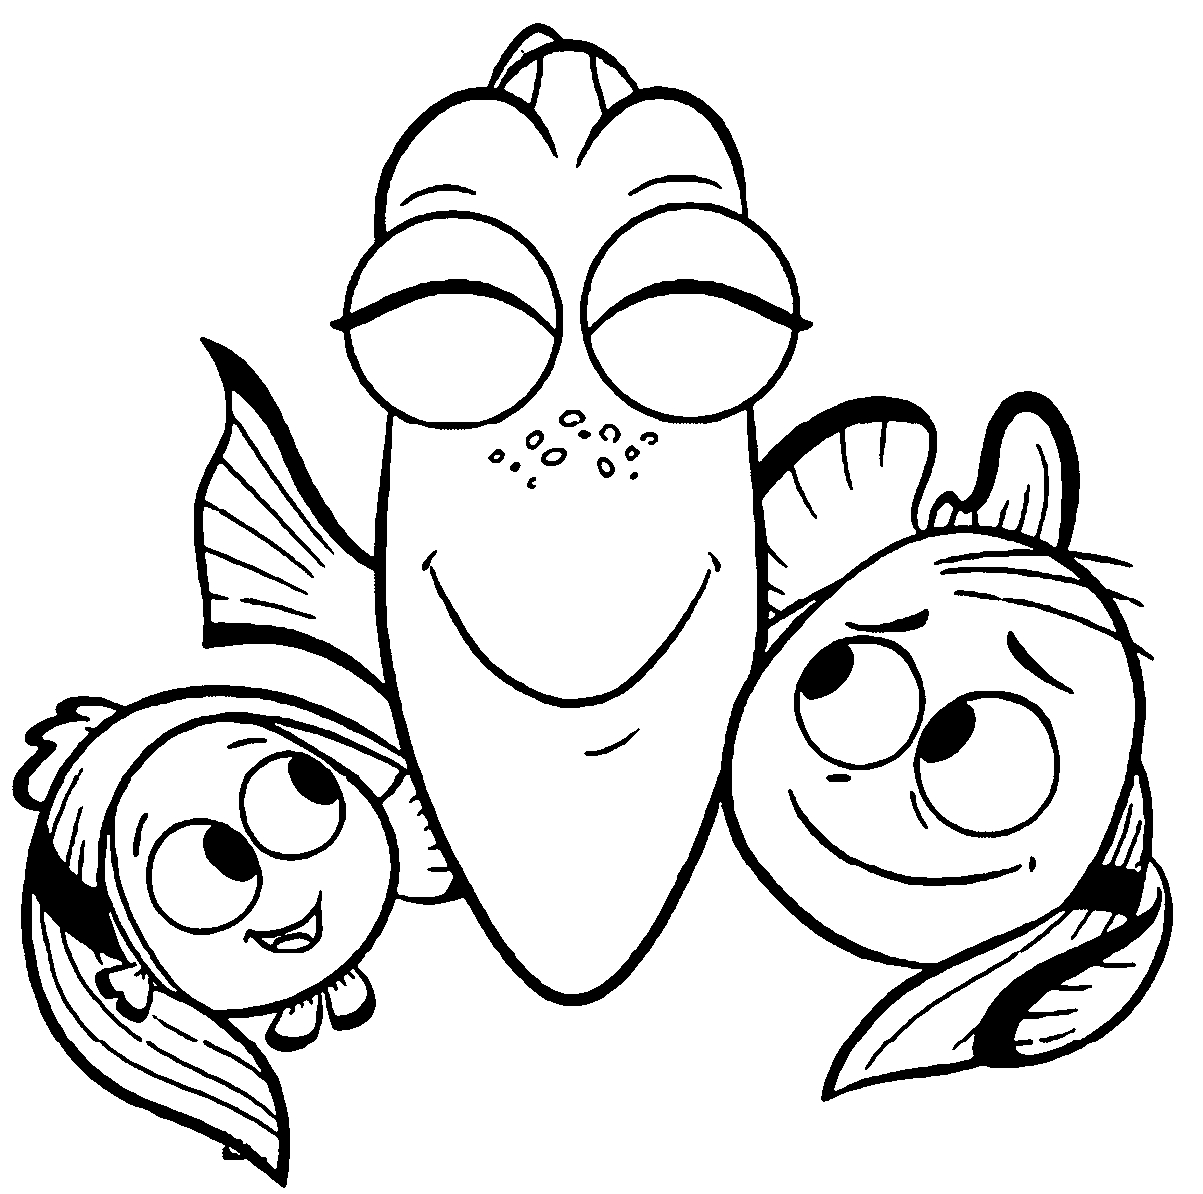 Dory Coloring Pages Best Coloring Pages For Kids BEDECOR Free Coloring Picture wallpaper give a chance to color on the wall without getting in trouble! Fill the walls of your home or office with stress-relieving [bedroomdecorz.blogspot.com]